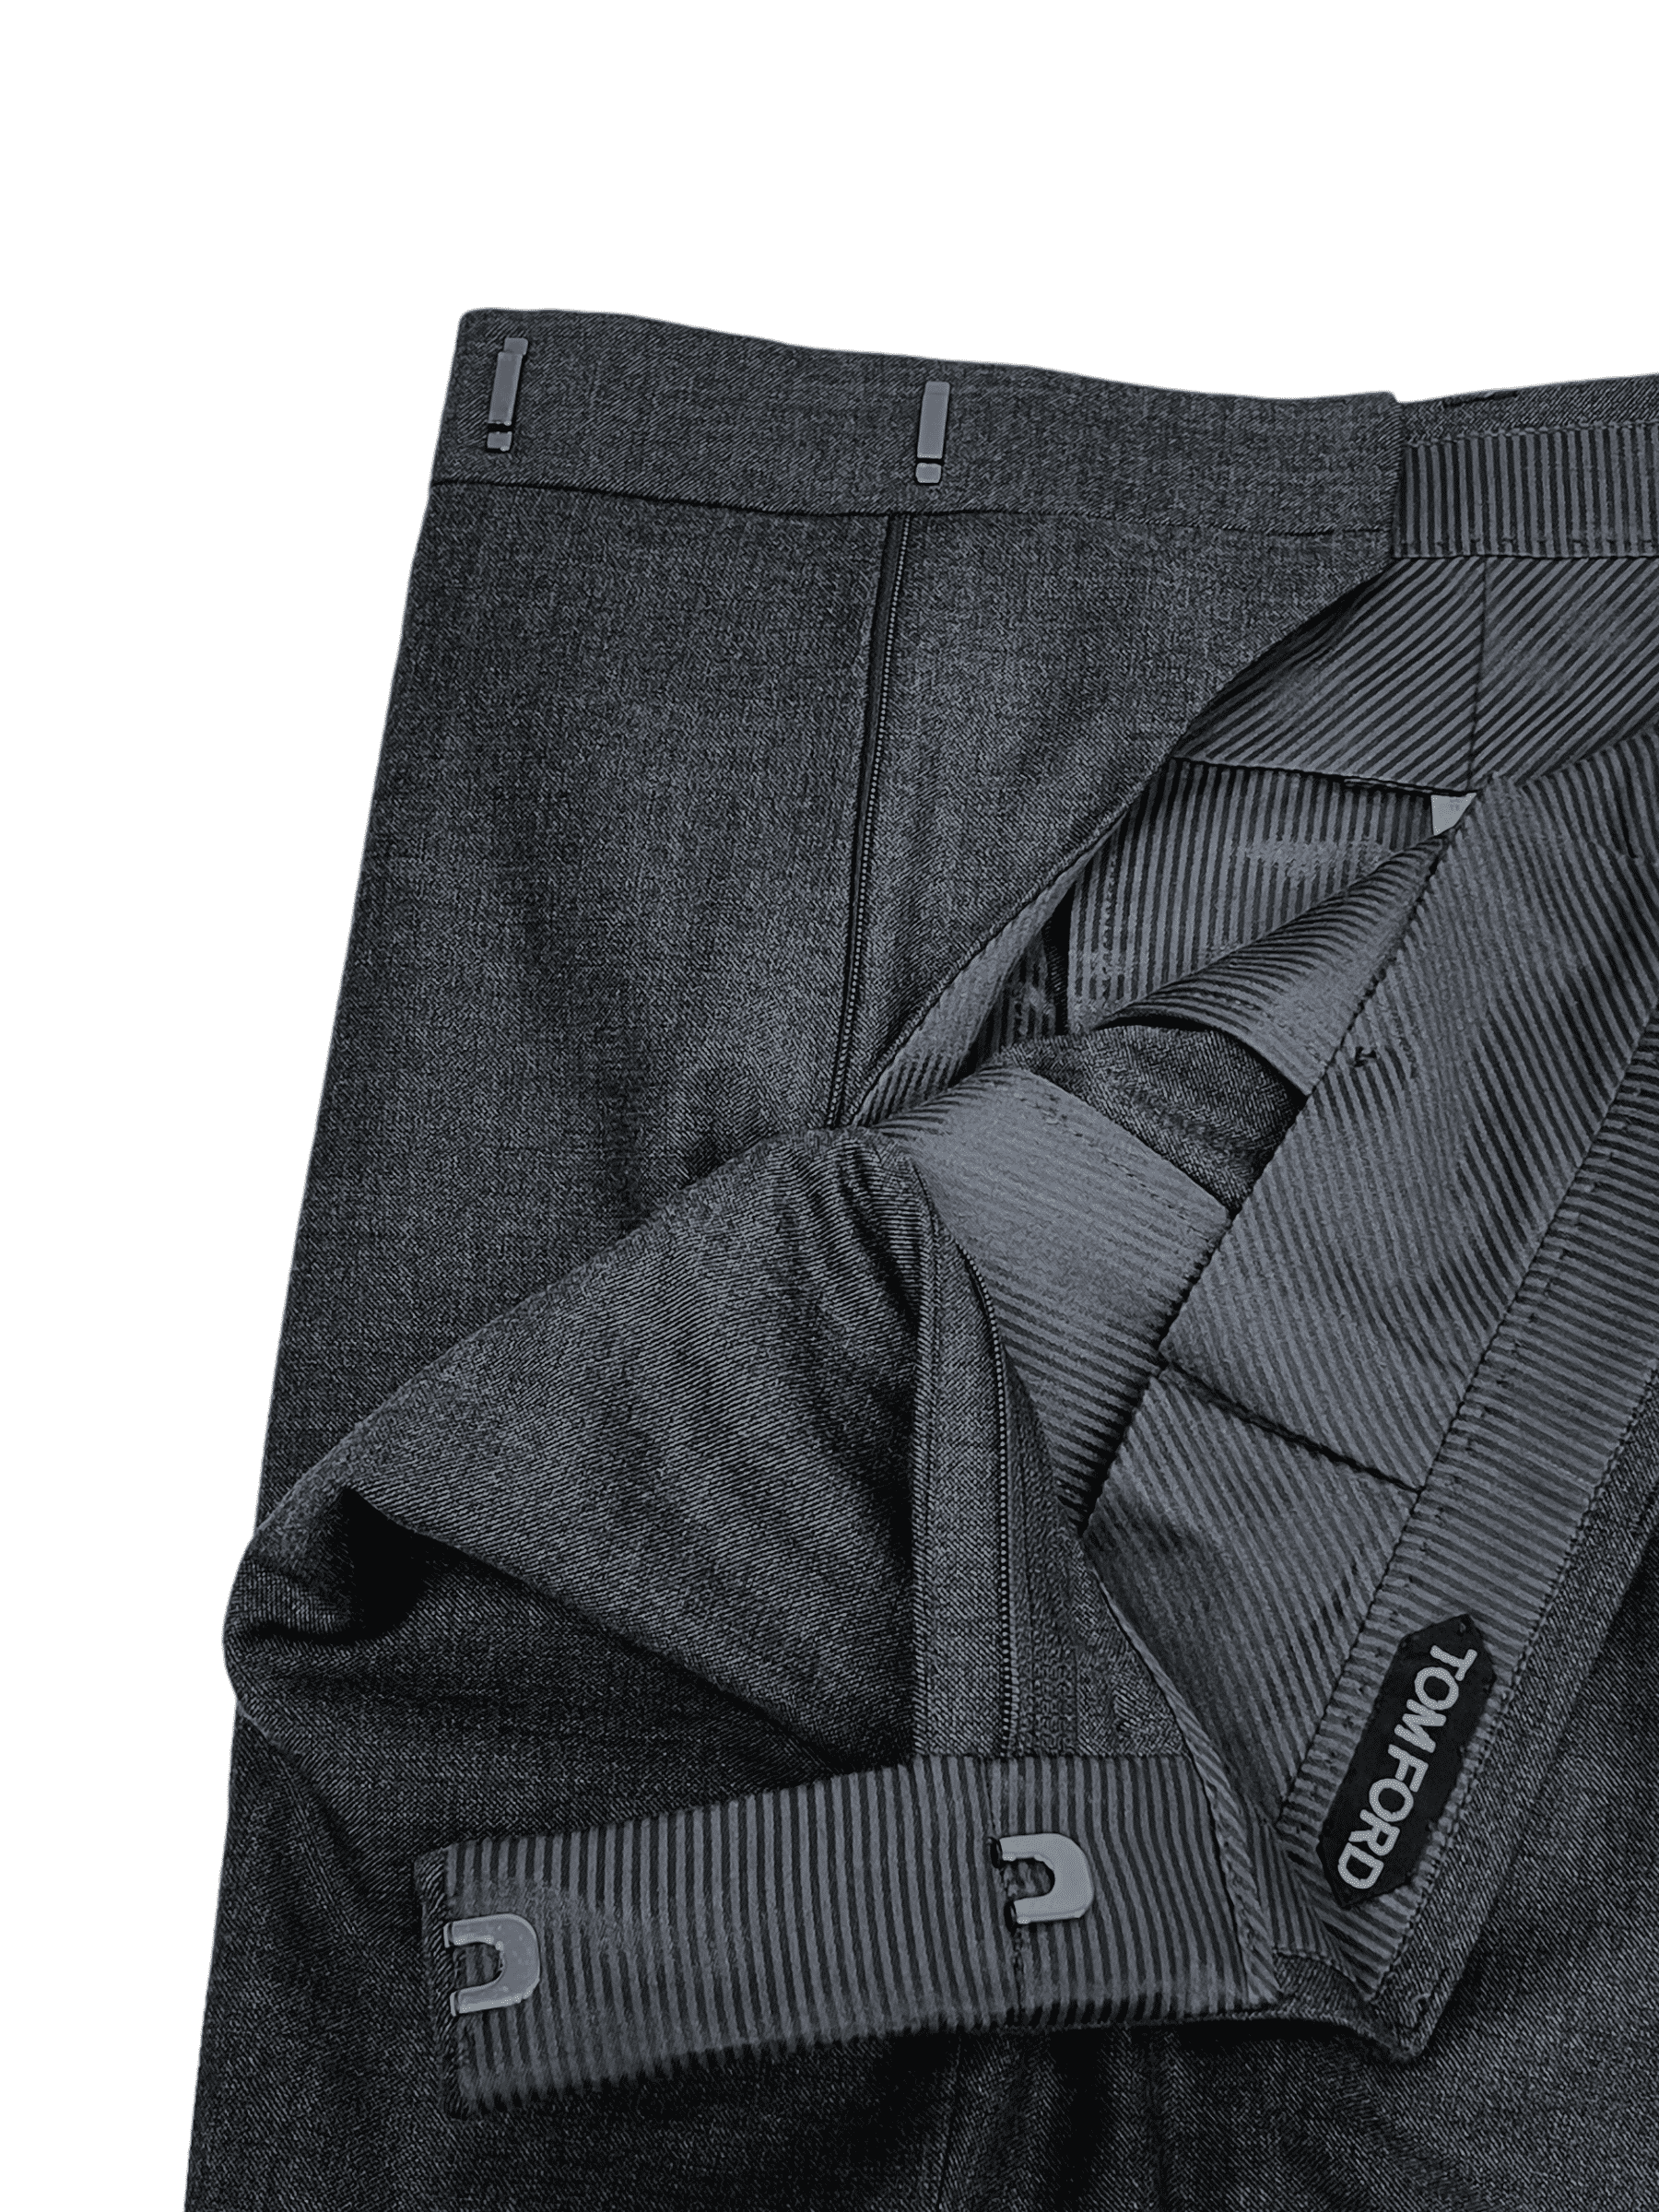 Tom Ford Charcoal Grey Wool Dress Pant 34W  – Genuine Design Luxury  Consignment